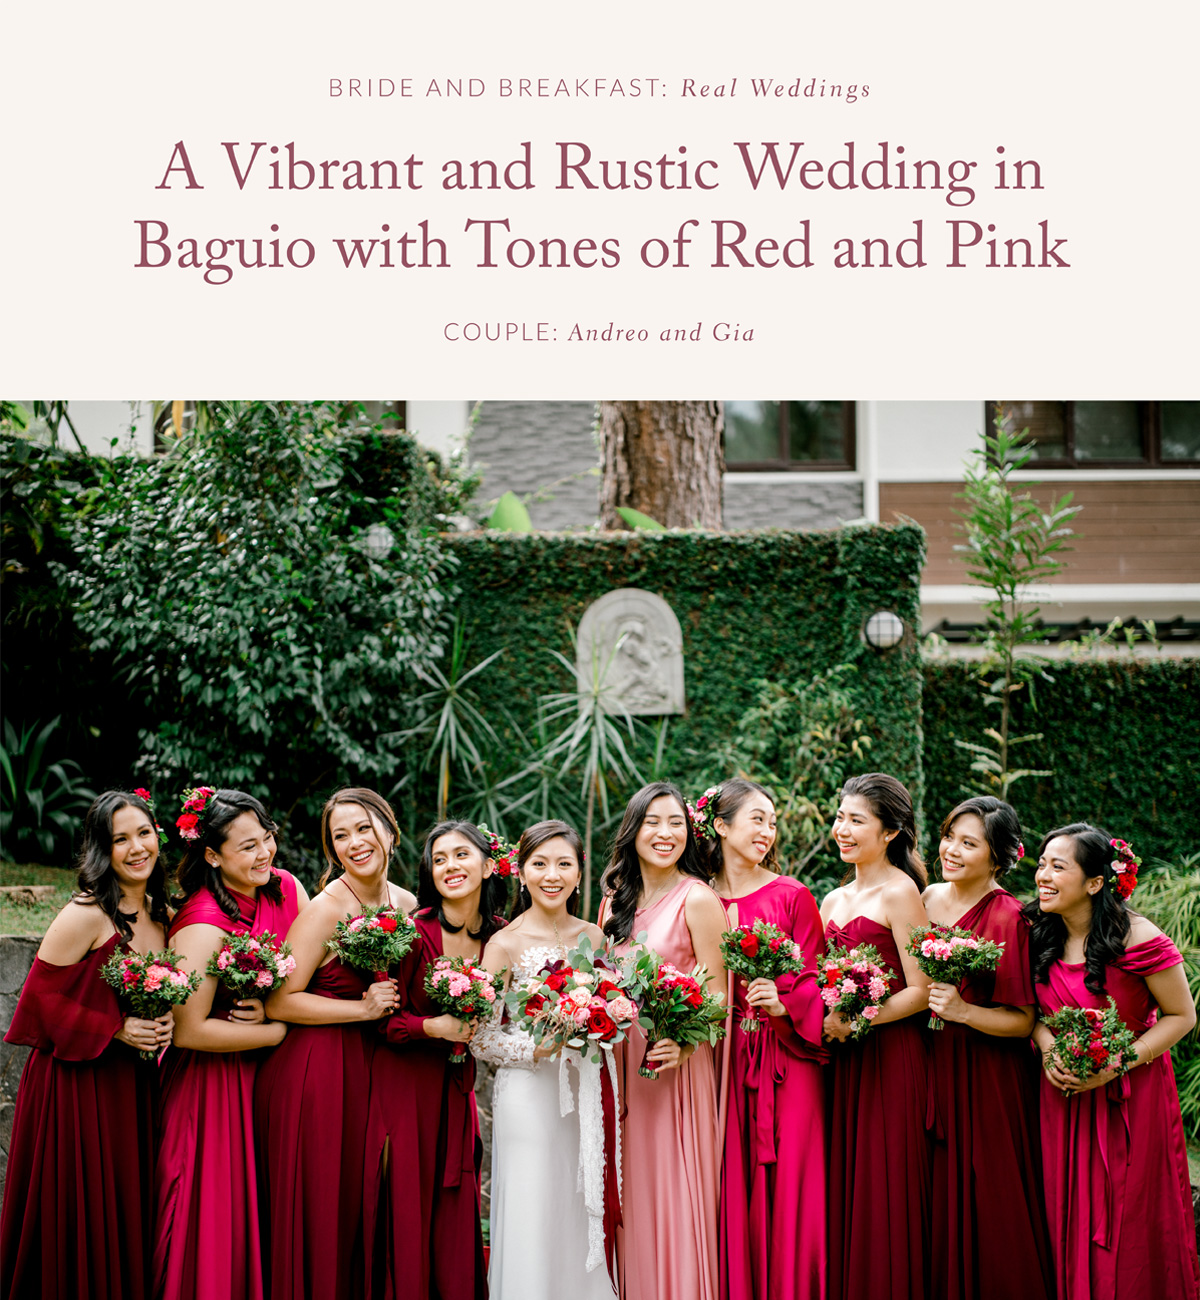 A Vibrant and Rustic Wedding in Baguio with Tones of Red and Pink